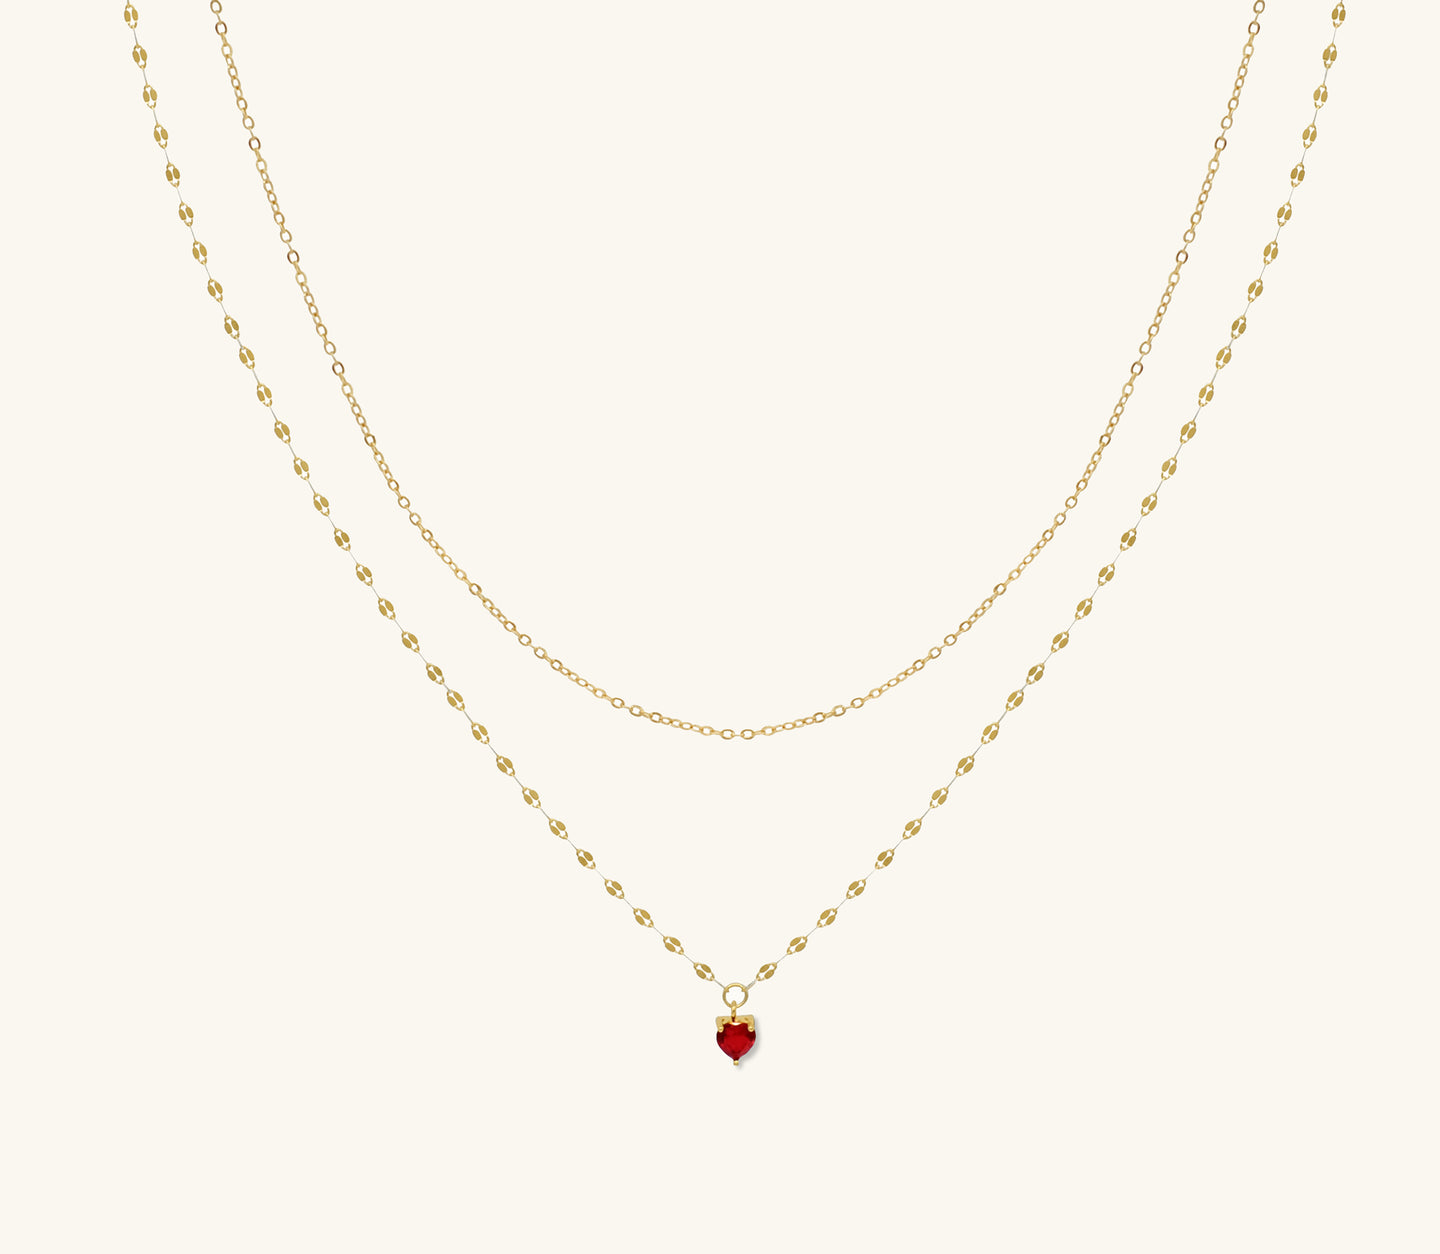 Emotive Red Heart Pendant Recharge Necklace by HYMI – Love and Passion